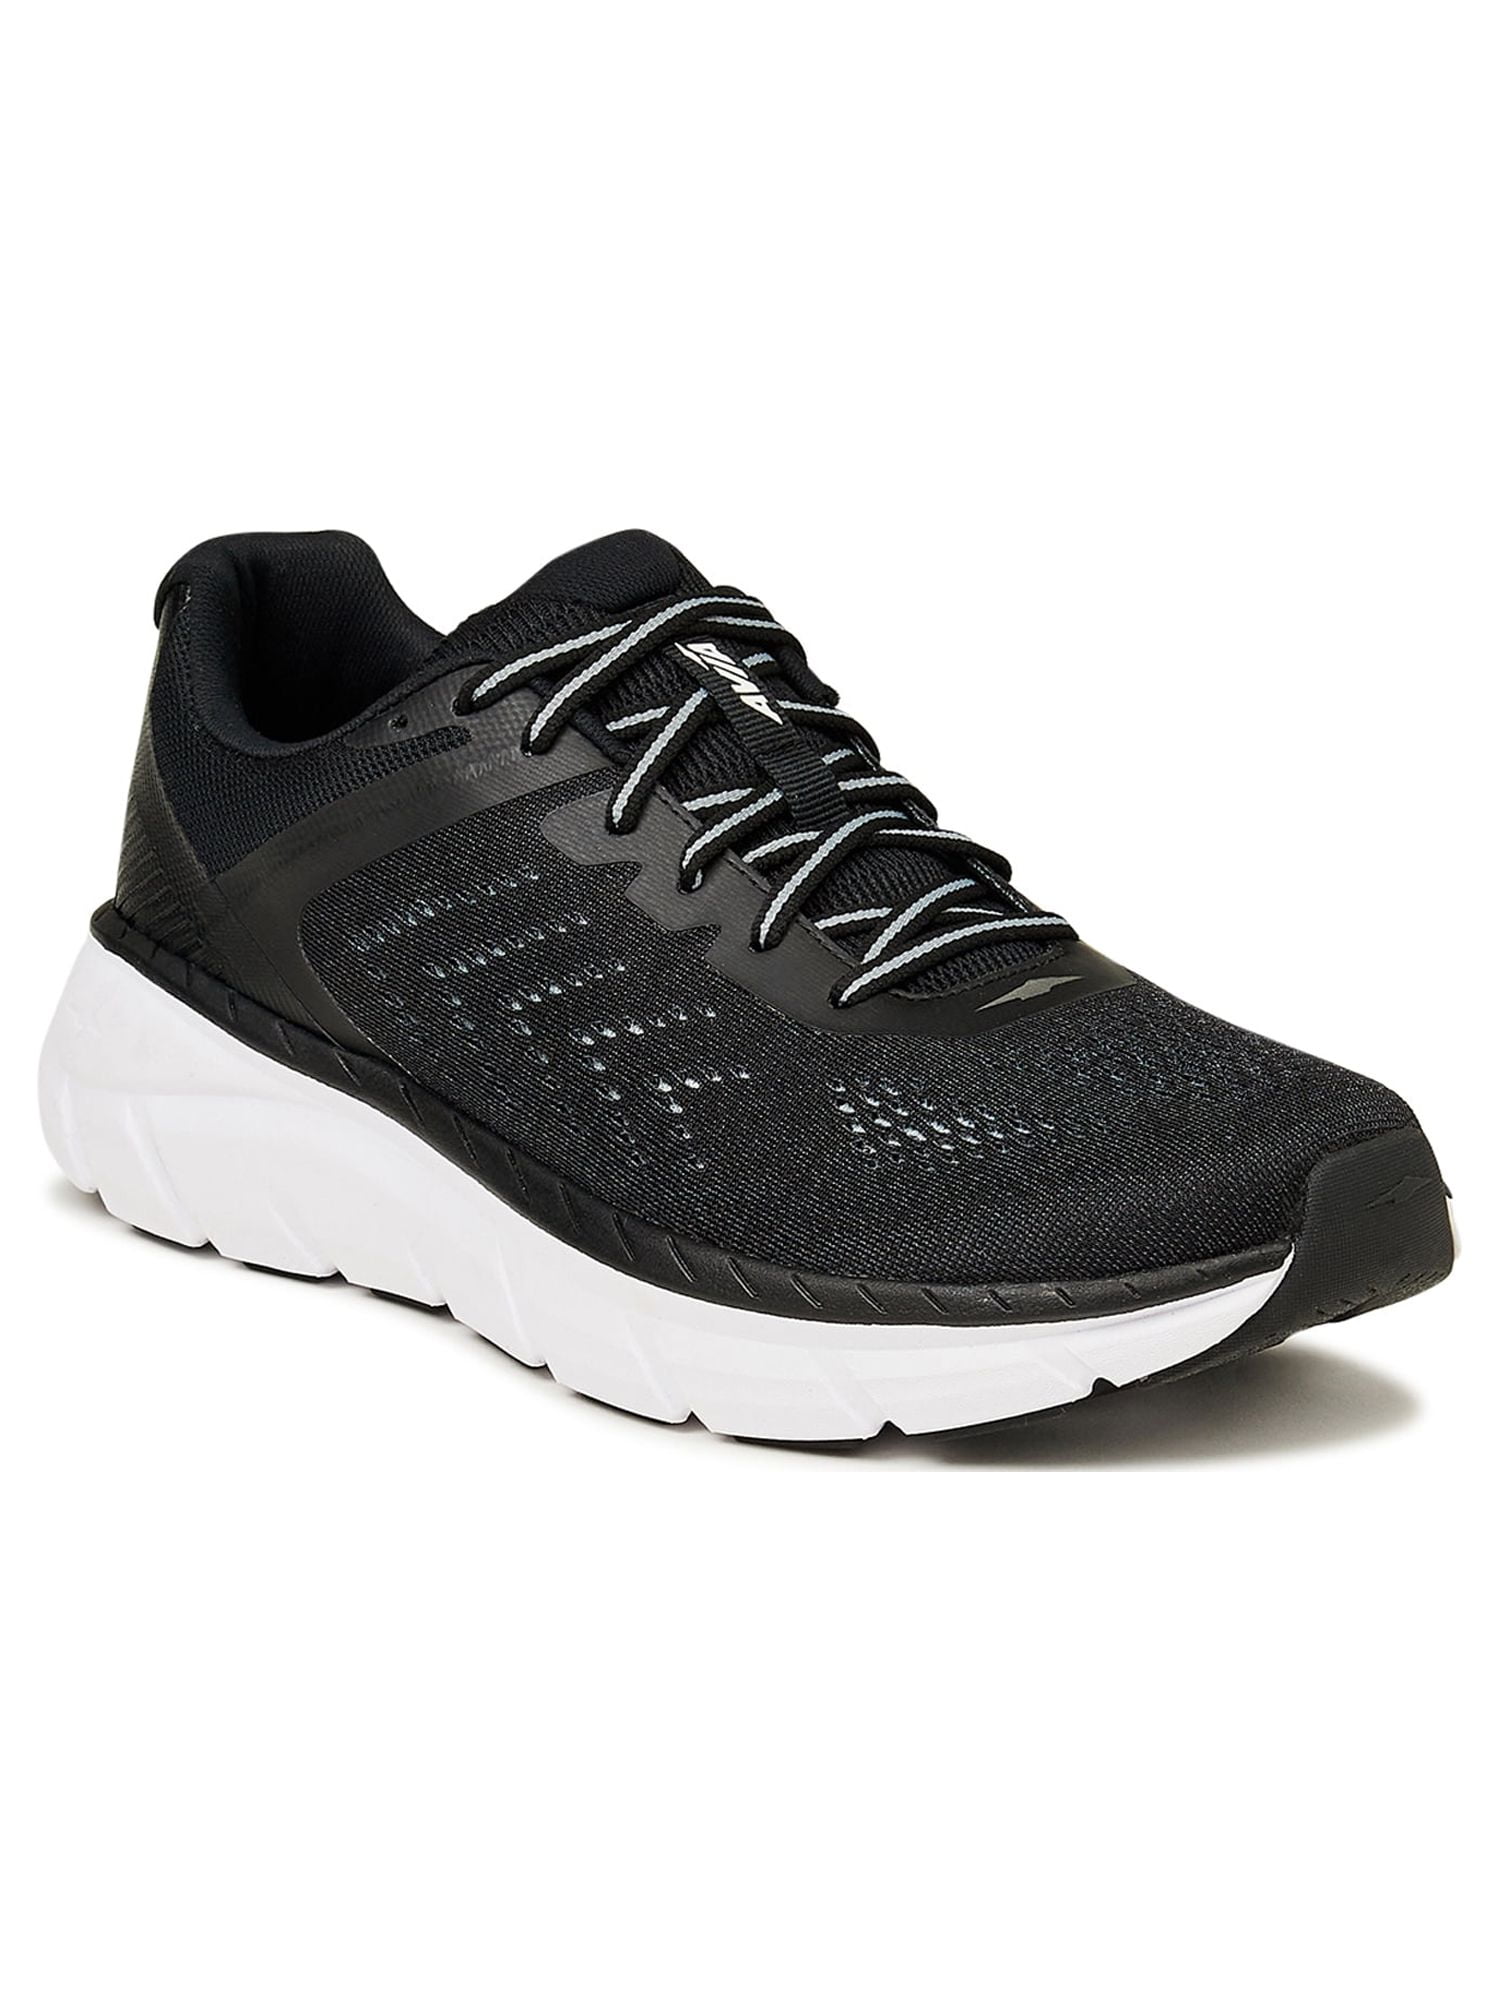 Avia Men's Hightail Athletic Performance Running Shoes 